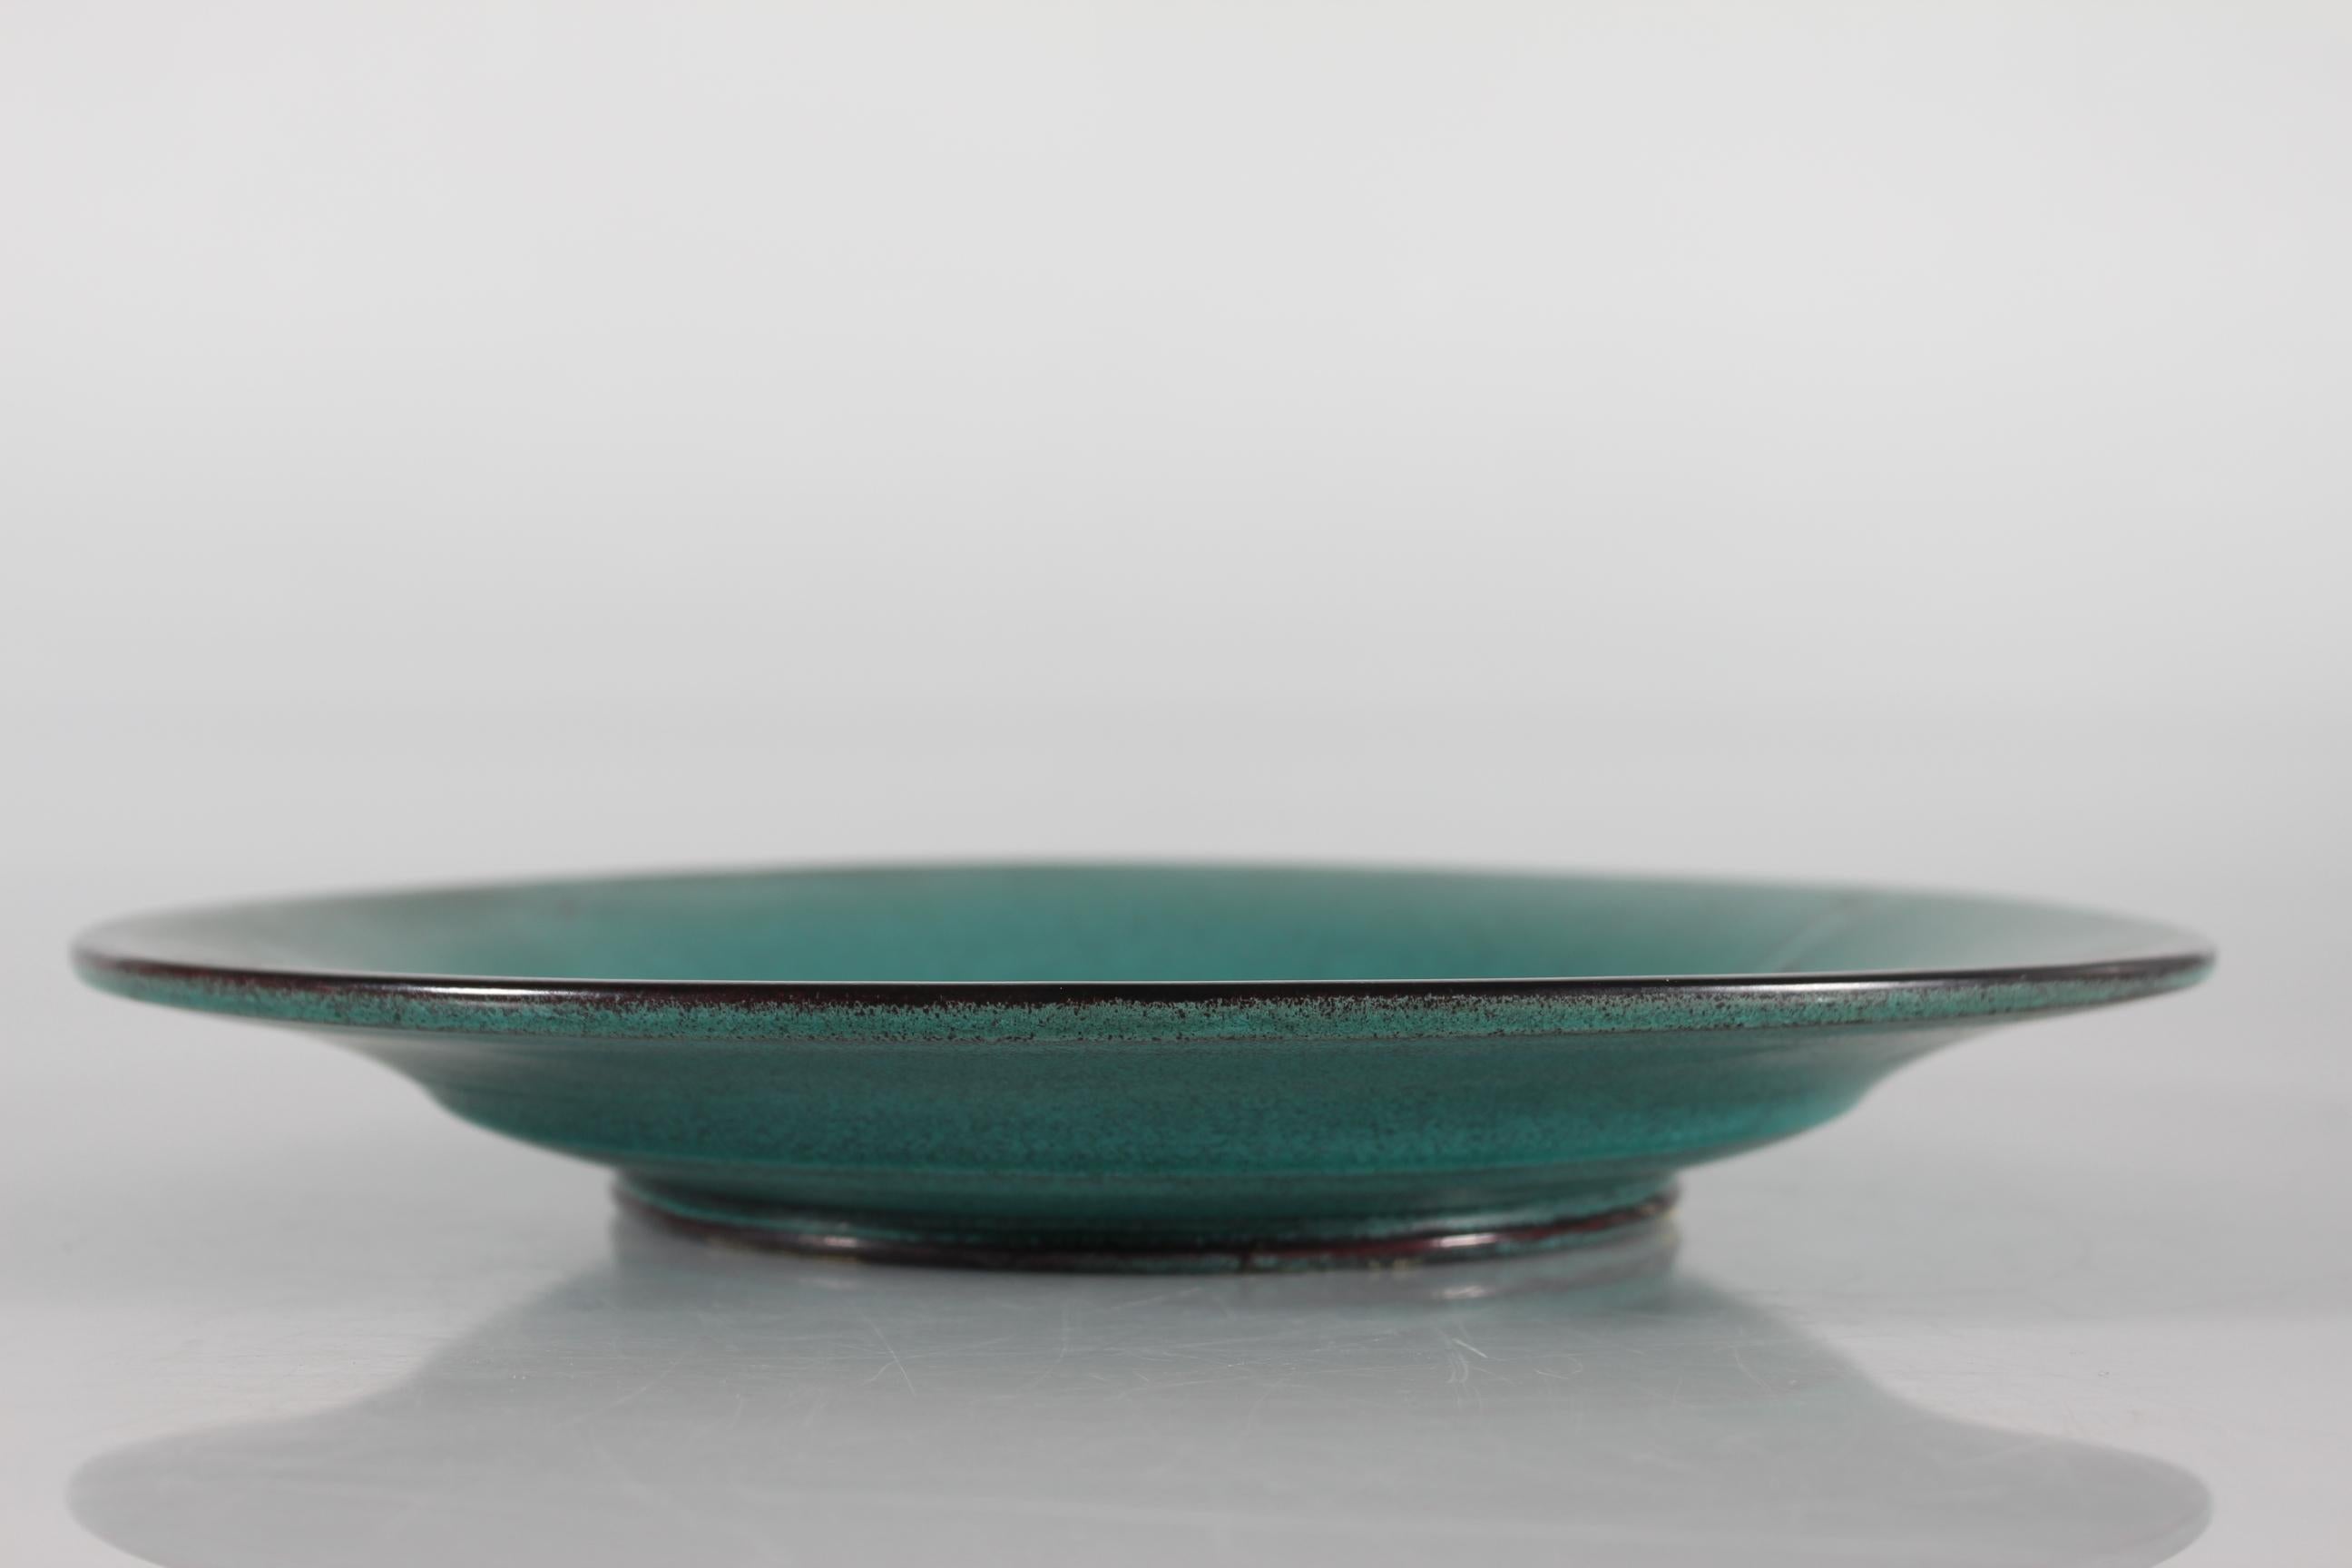 Large Art Deco ceramic platter/ low bowl by Nils Kähler for the pottery work-shop Kähler in Næstved, Denmark.

The bowl is decorated with luster verdigris green glaze with a touch of black

Marked: HAK 

Very good used condition without